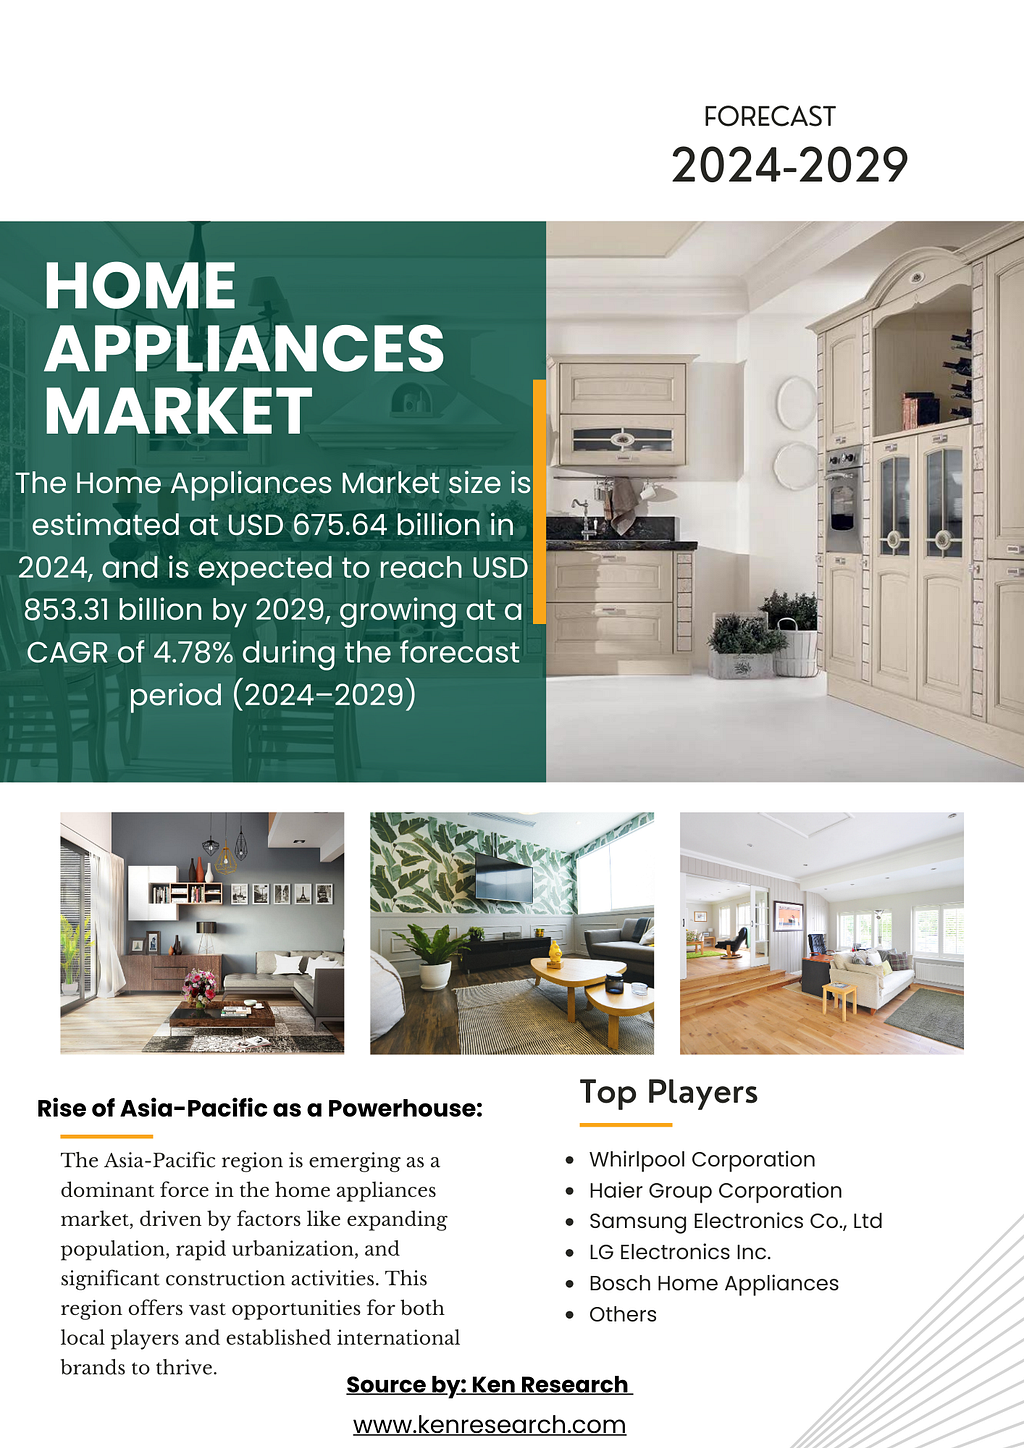 Home Appliance Market Overview